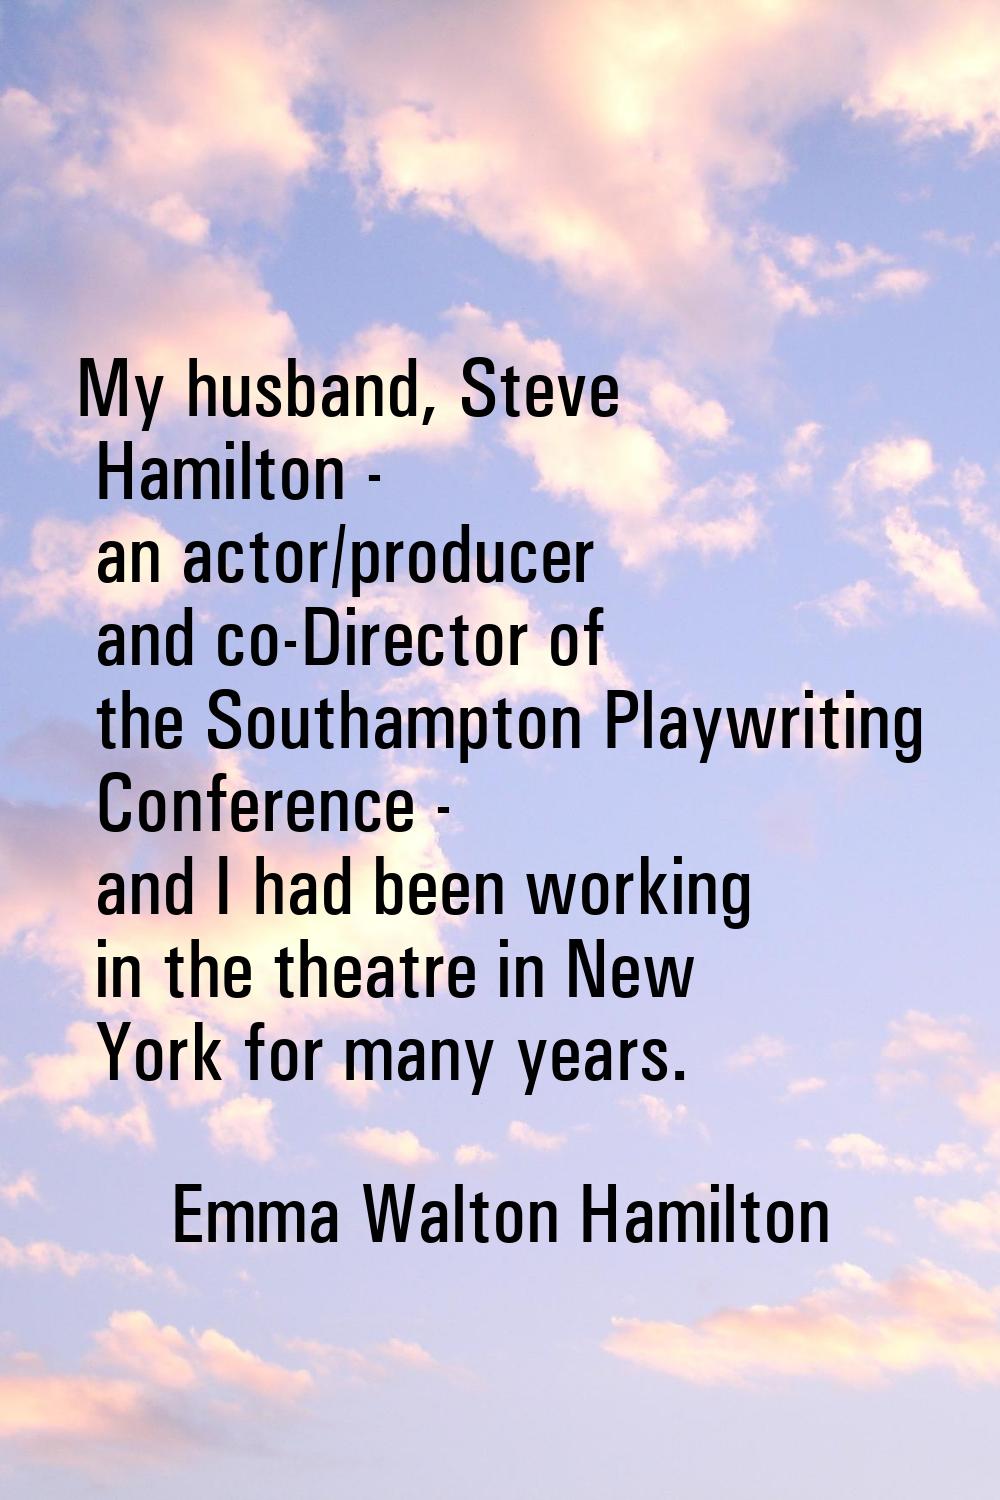 My husband, Steve Hamilton - an actor/producer and co-Director of the Southampton Playwriting Confe